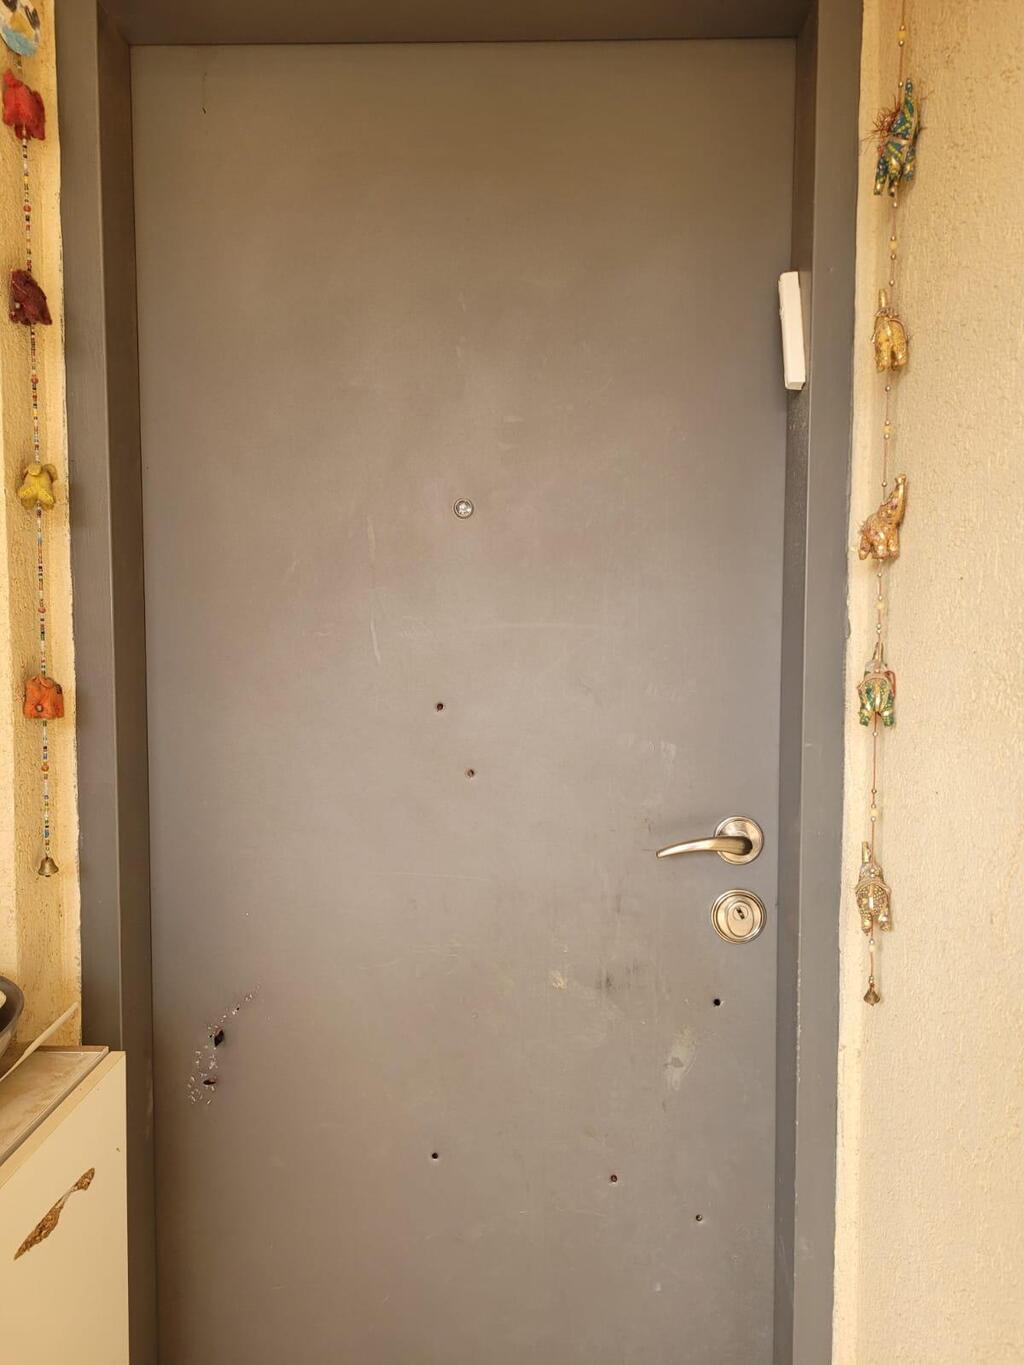 The door of the bomb shelter with bullet holes in it 